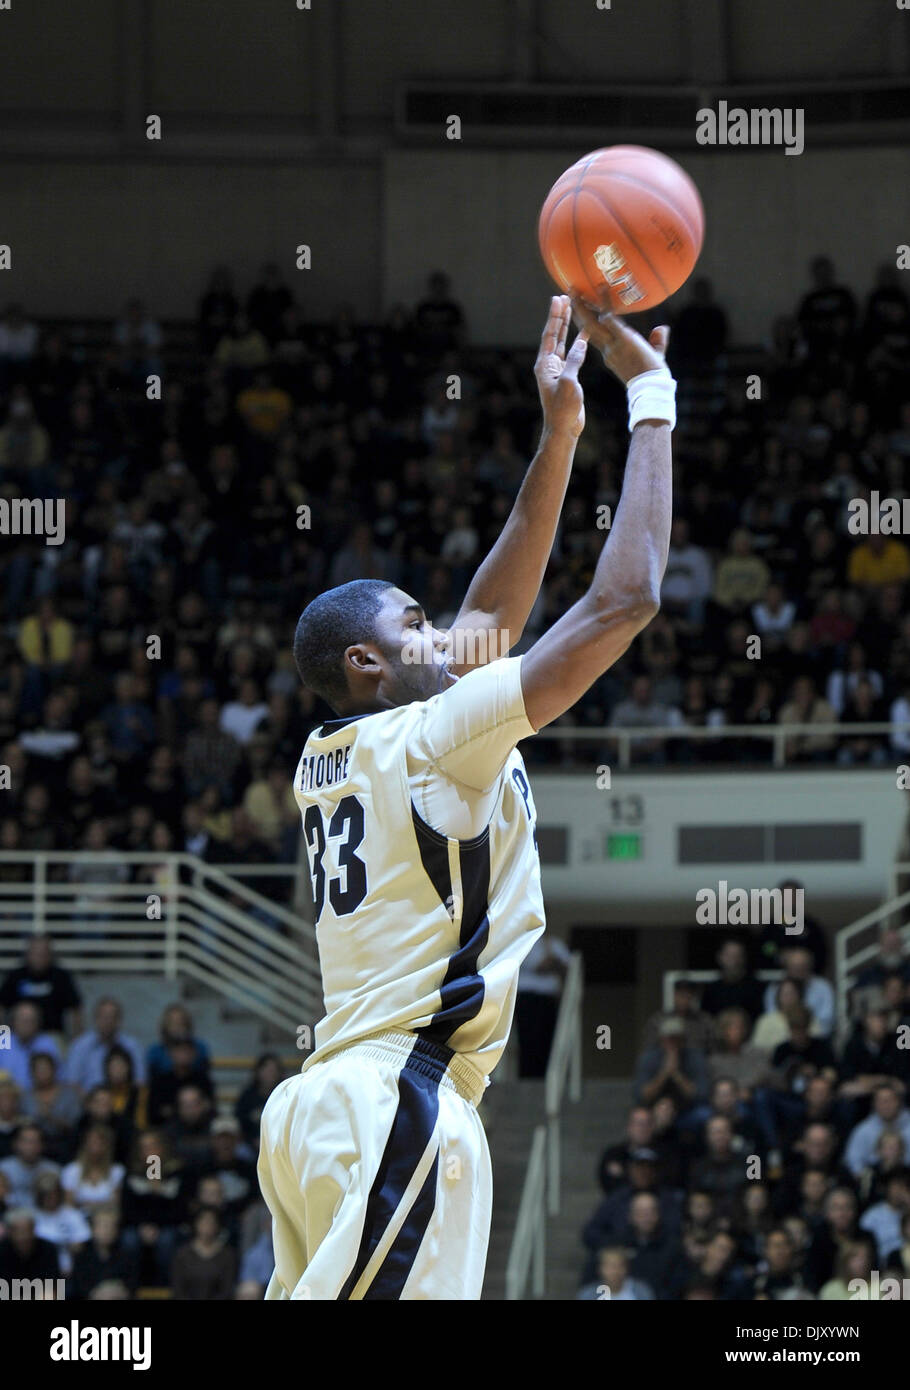 Nov. 14, 2010 - West Lafayette, Indiana, United States of America - Purdue's Sr. G  E'Twaun Moore (33) launches a shot in the first half in the game between Purdue and Howard in Mackey Arena. (Credit Image: © Sandra Dukes/Southcreek Global/ZUMApress.com) Stock Photo